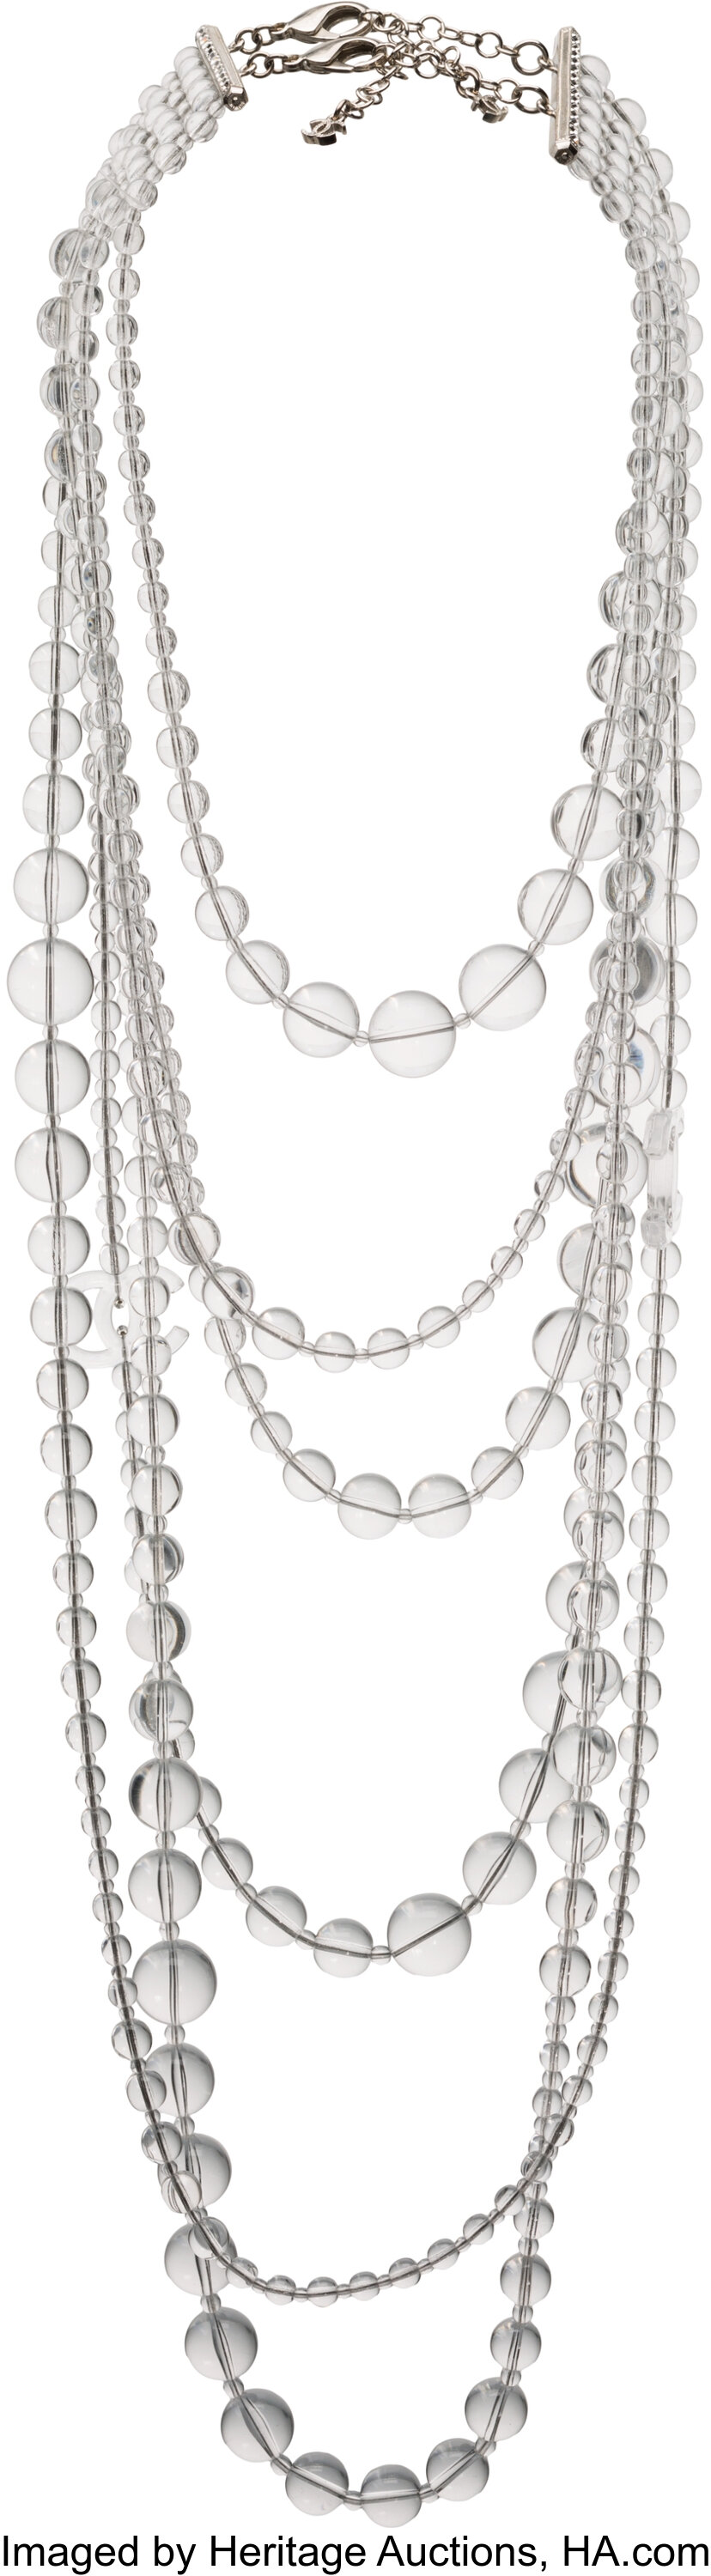 Faux Pearl & Crystal 'CC' Long Necklace